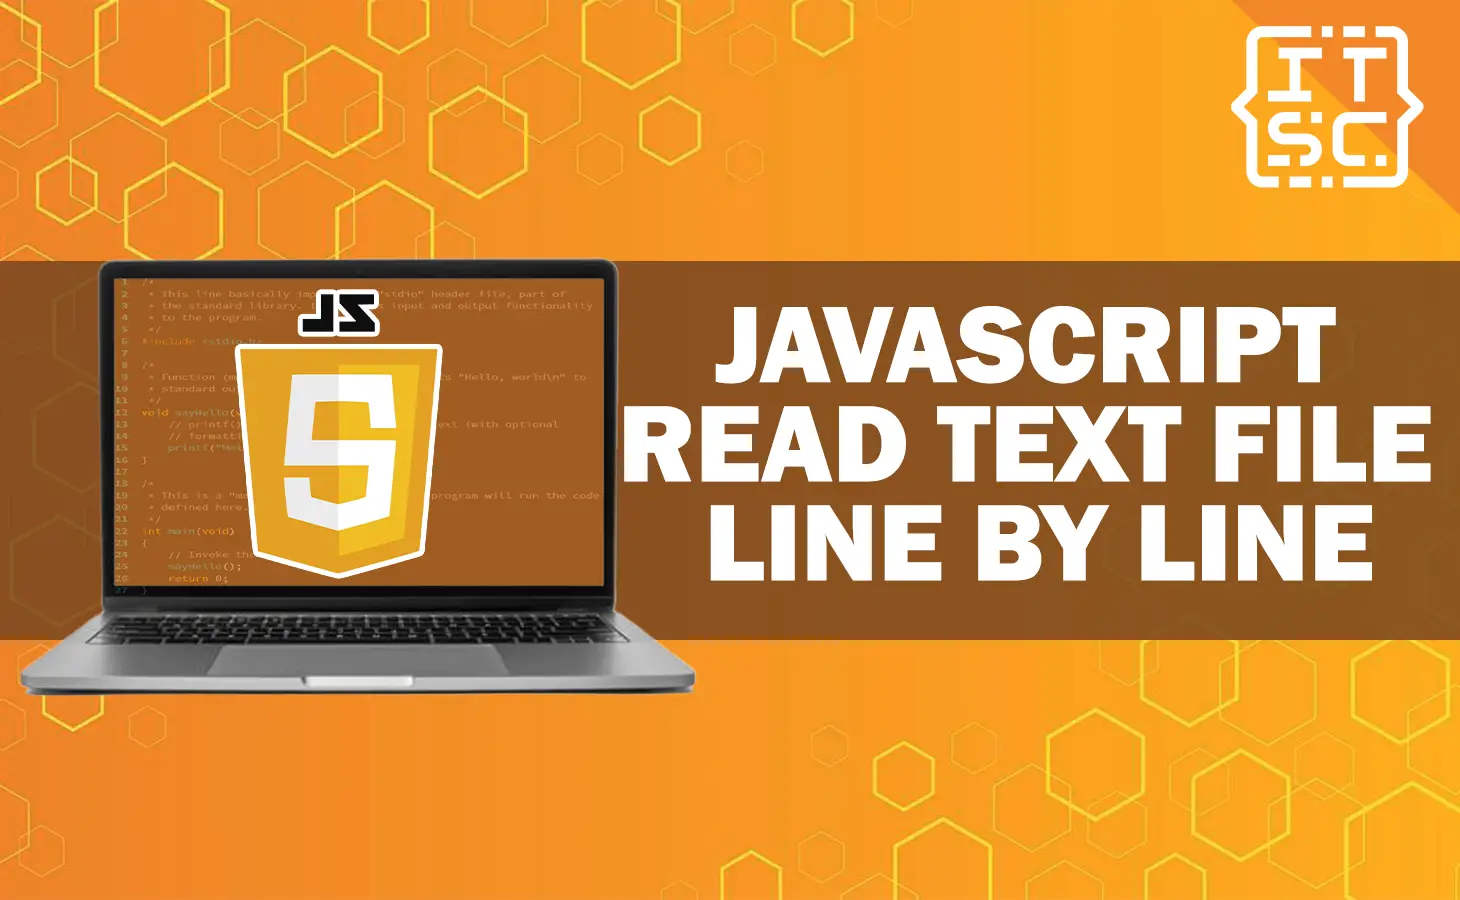 javascripy read text file line by line